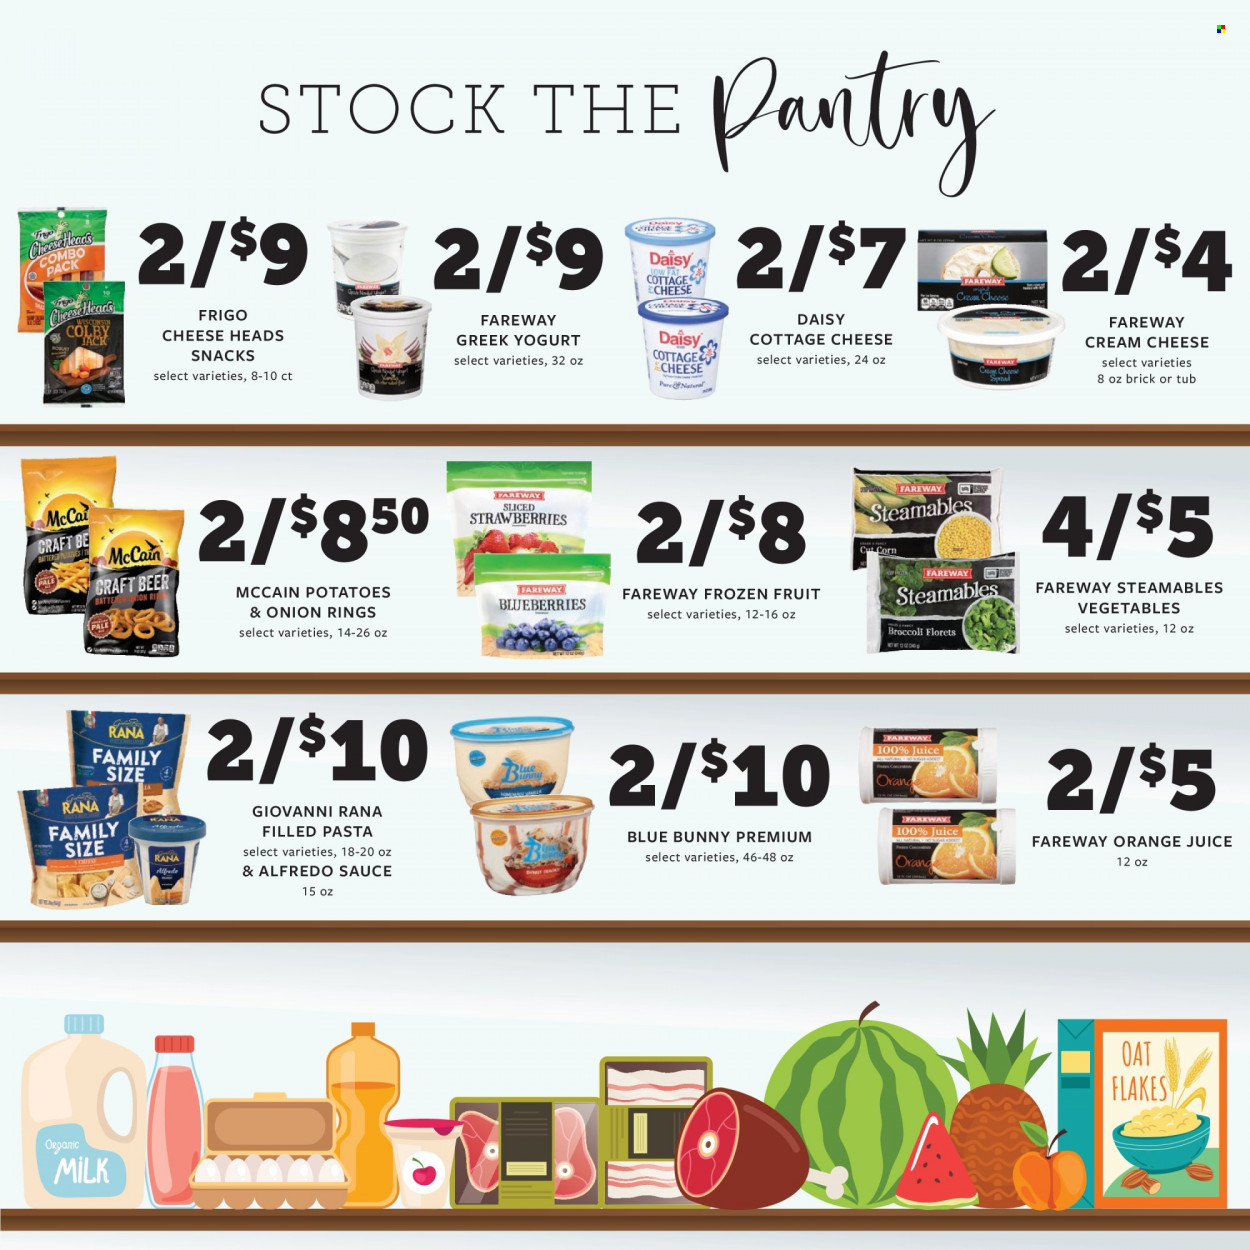 thumbnail - Fareway Flyer - 02/27/2023 - 04/01/2023 - Sales products - broccoli, corn, blueberries, strawberries, onion rings, pasta, sauce, Alfredo sauce, Giovanni Rana, Rana, filled pasta, cheese spread, Colby cheese, cottage cheese, cream cheese, greek yoghurt, yoghurt, milk, Blue Bunny, McCain, snack, sugar, oats, orange juice, juice, beer. Page 7.